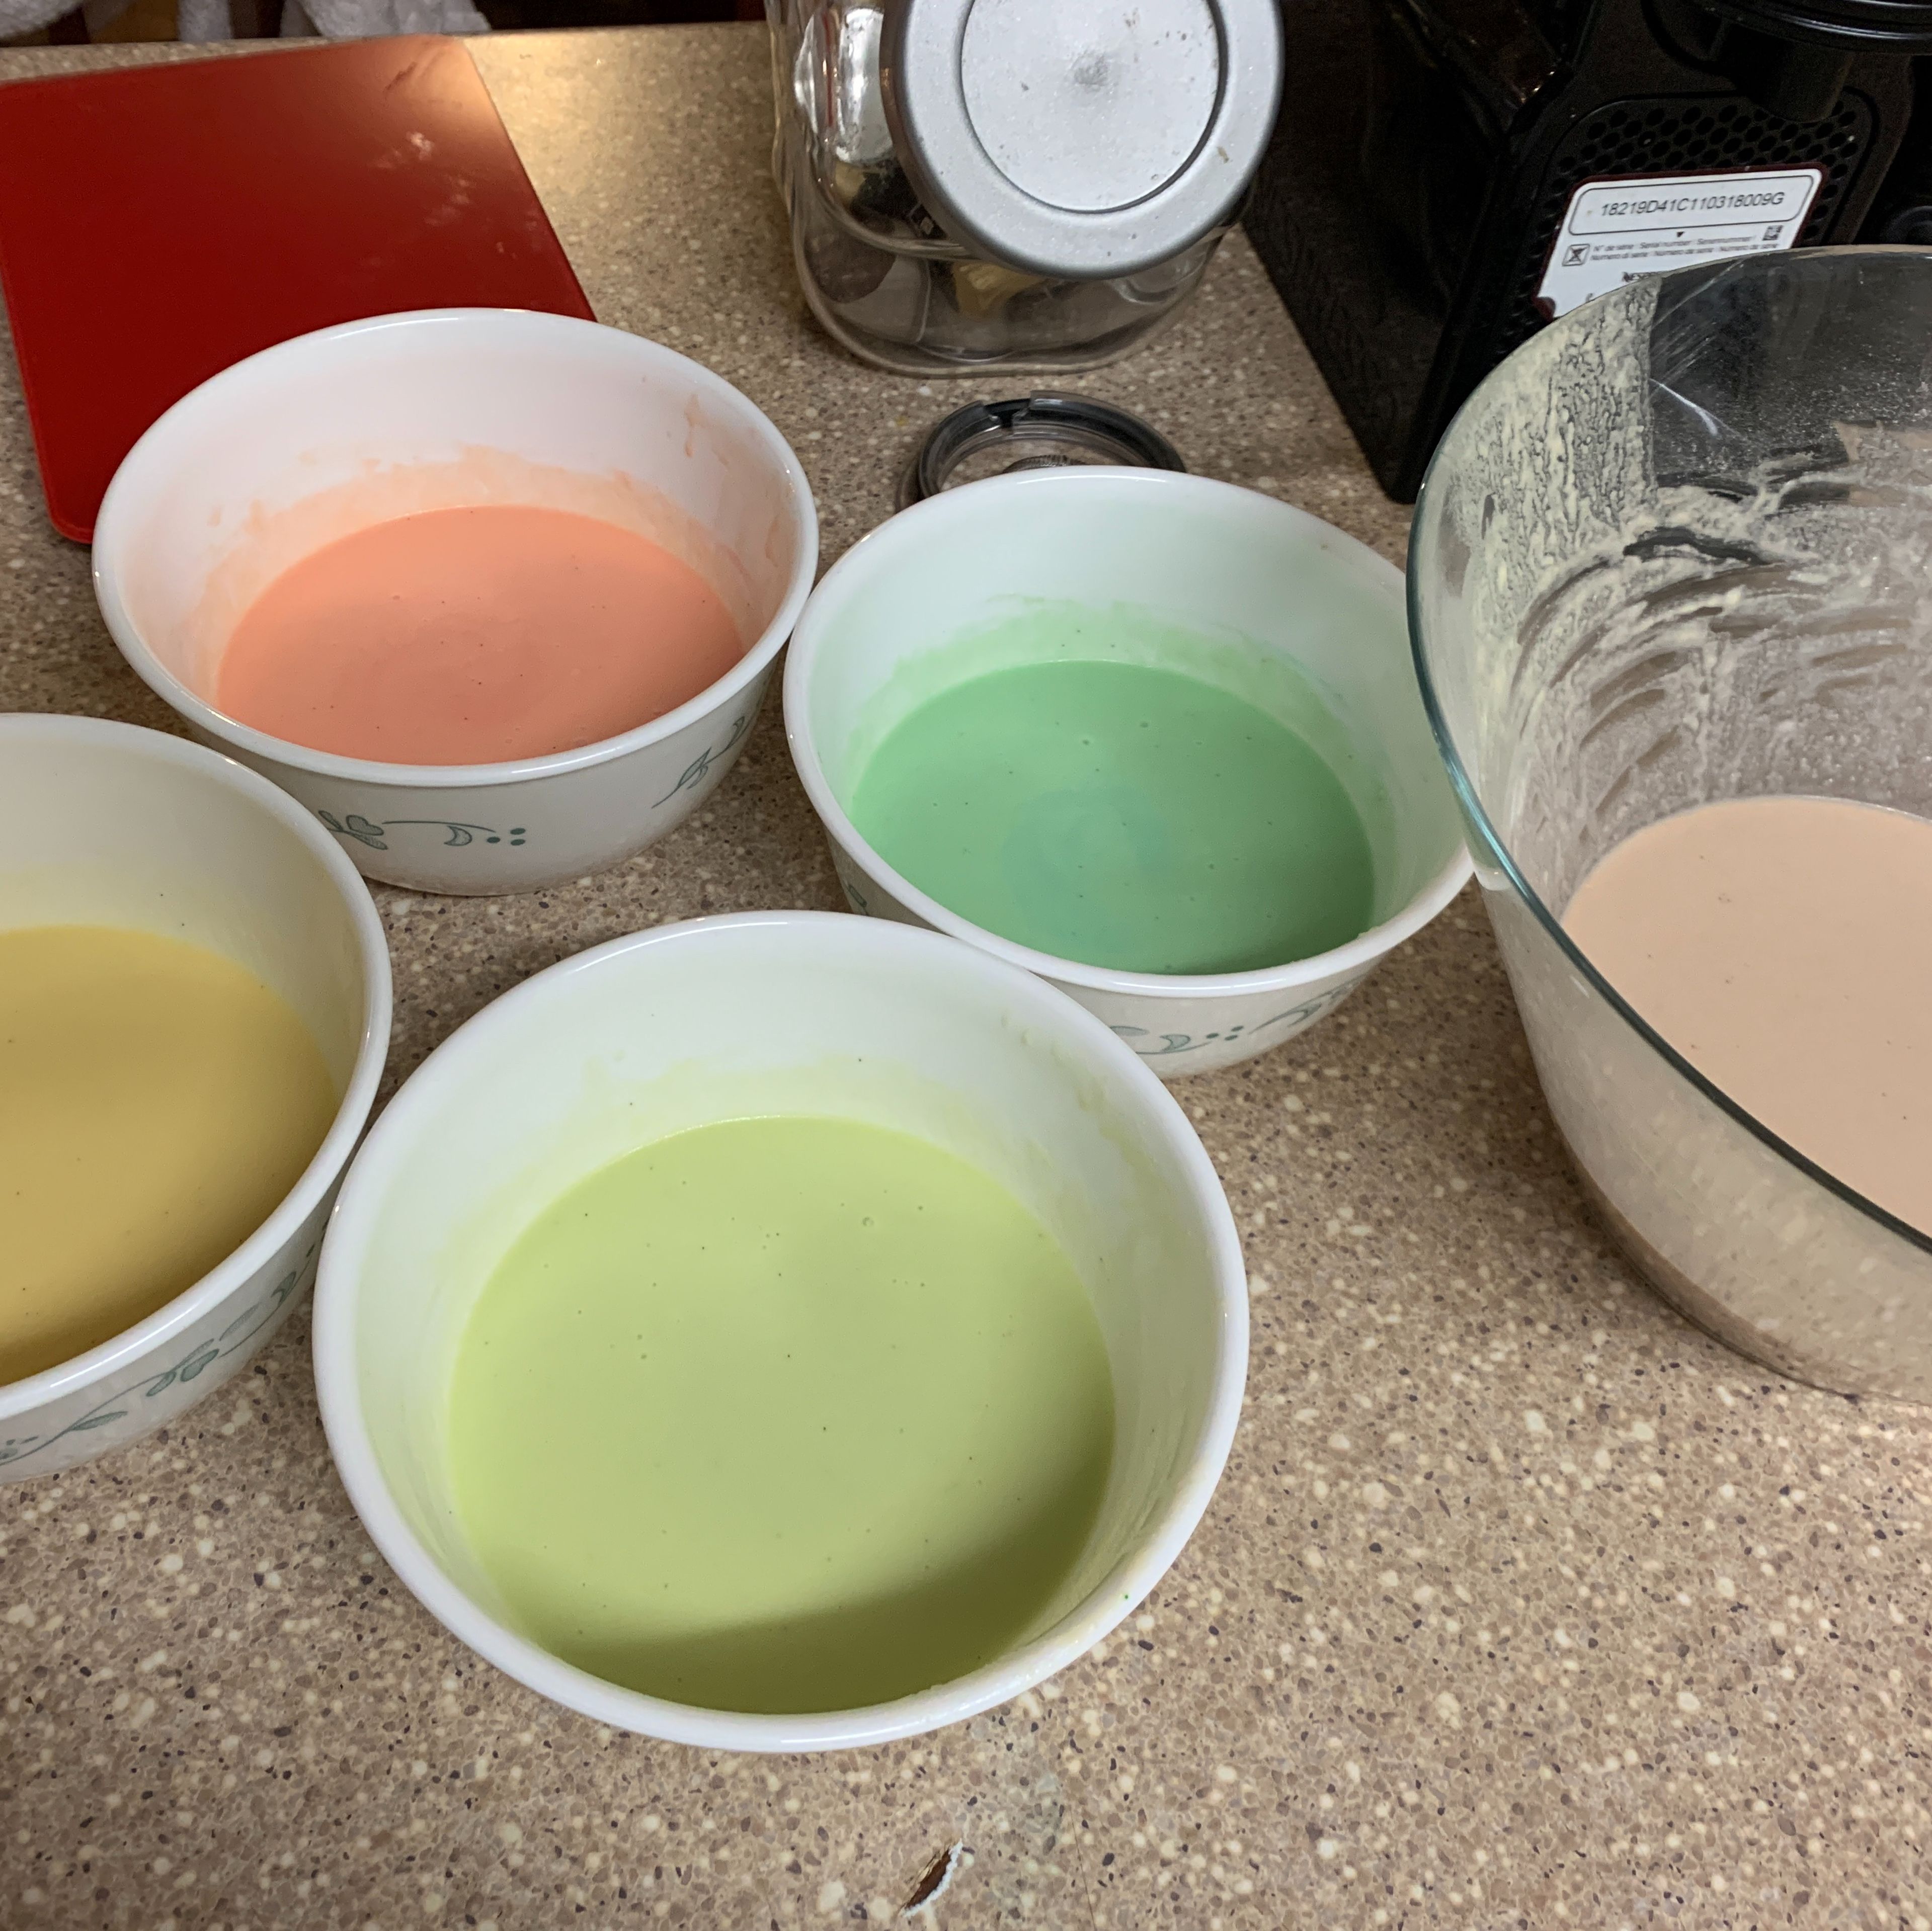 Divide the mixture into 5 equal portion￼ then add whatever colours you want. I’ve used pick, green, yellow, lime and purple.